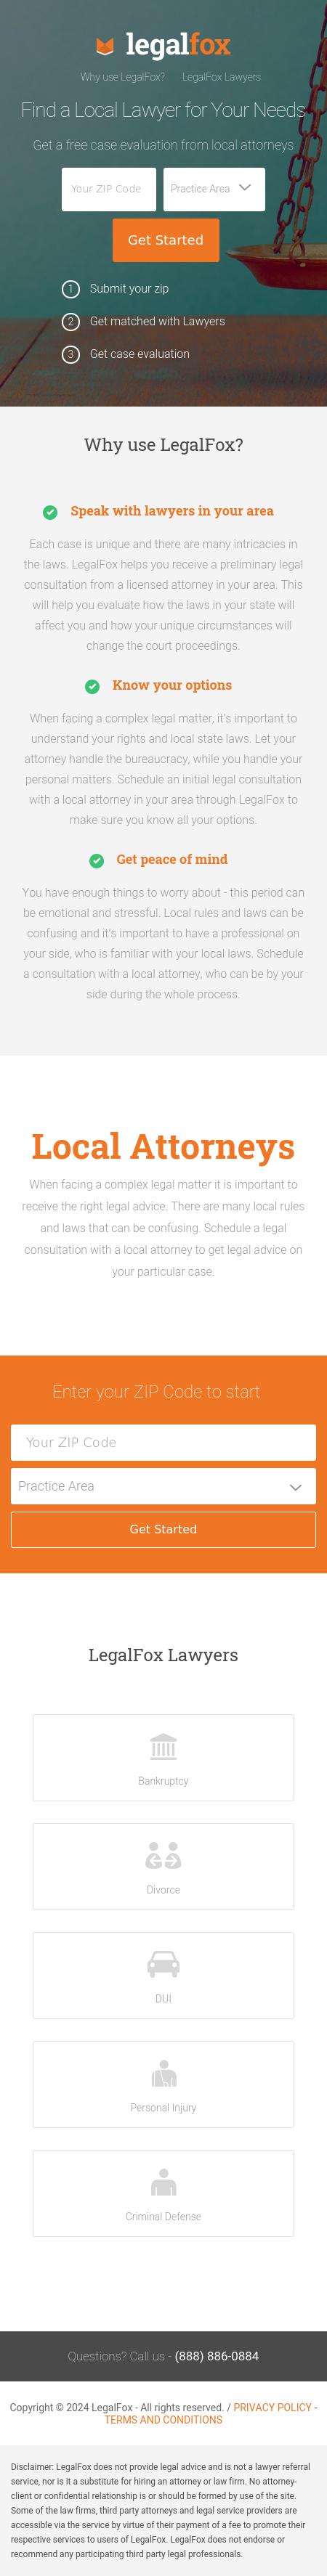 Find a Local Attorney - Colorado Springs CO Lawyers